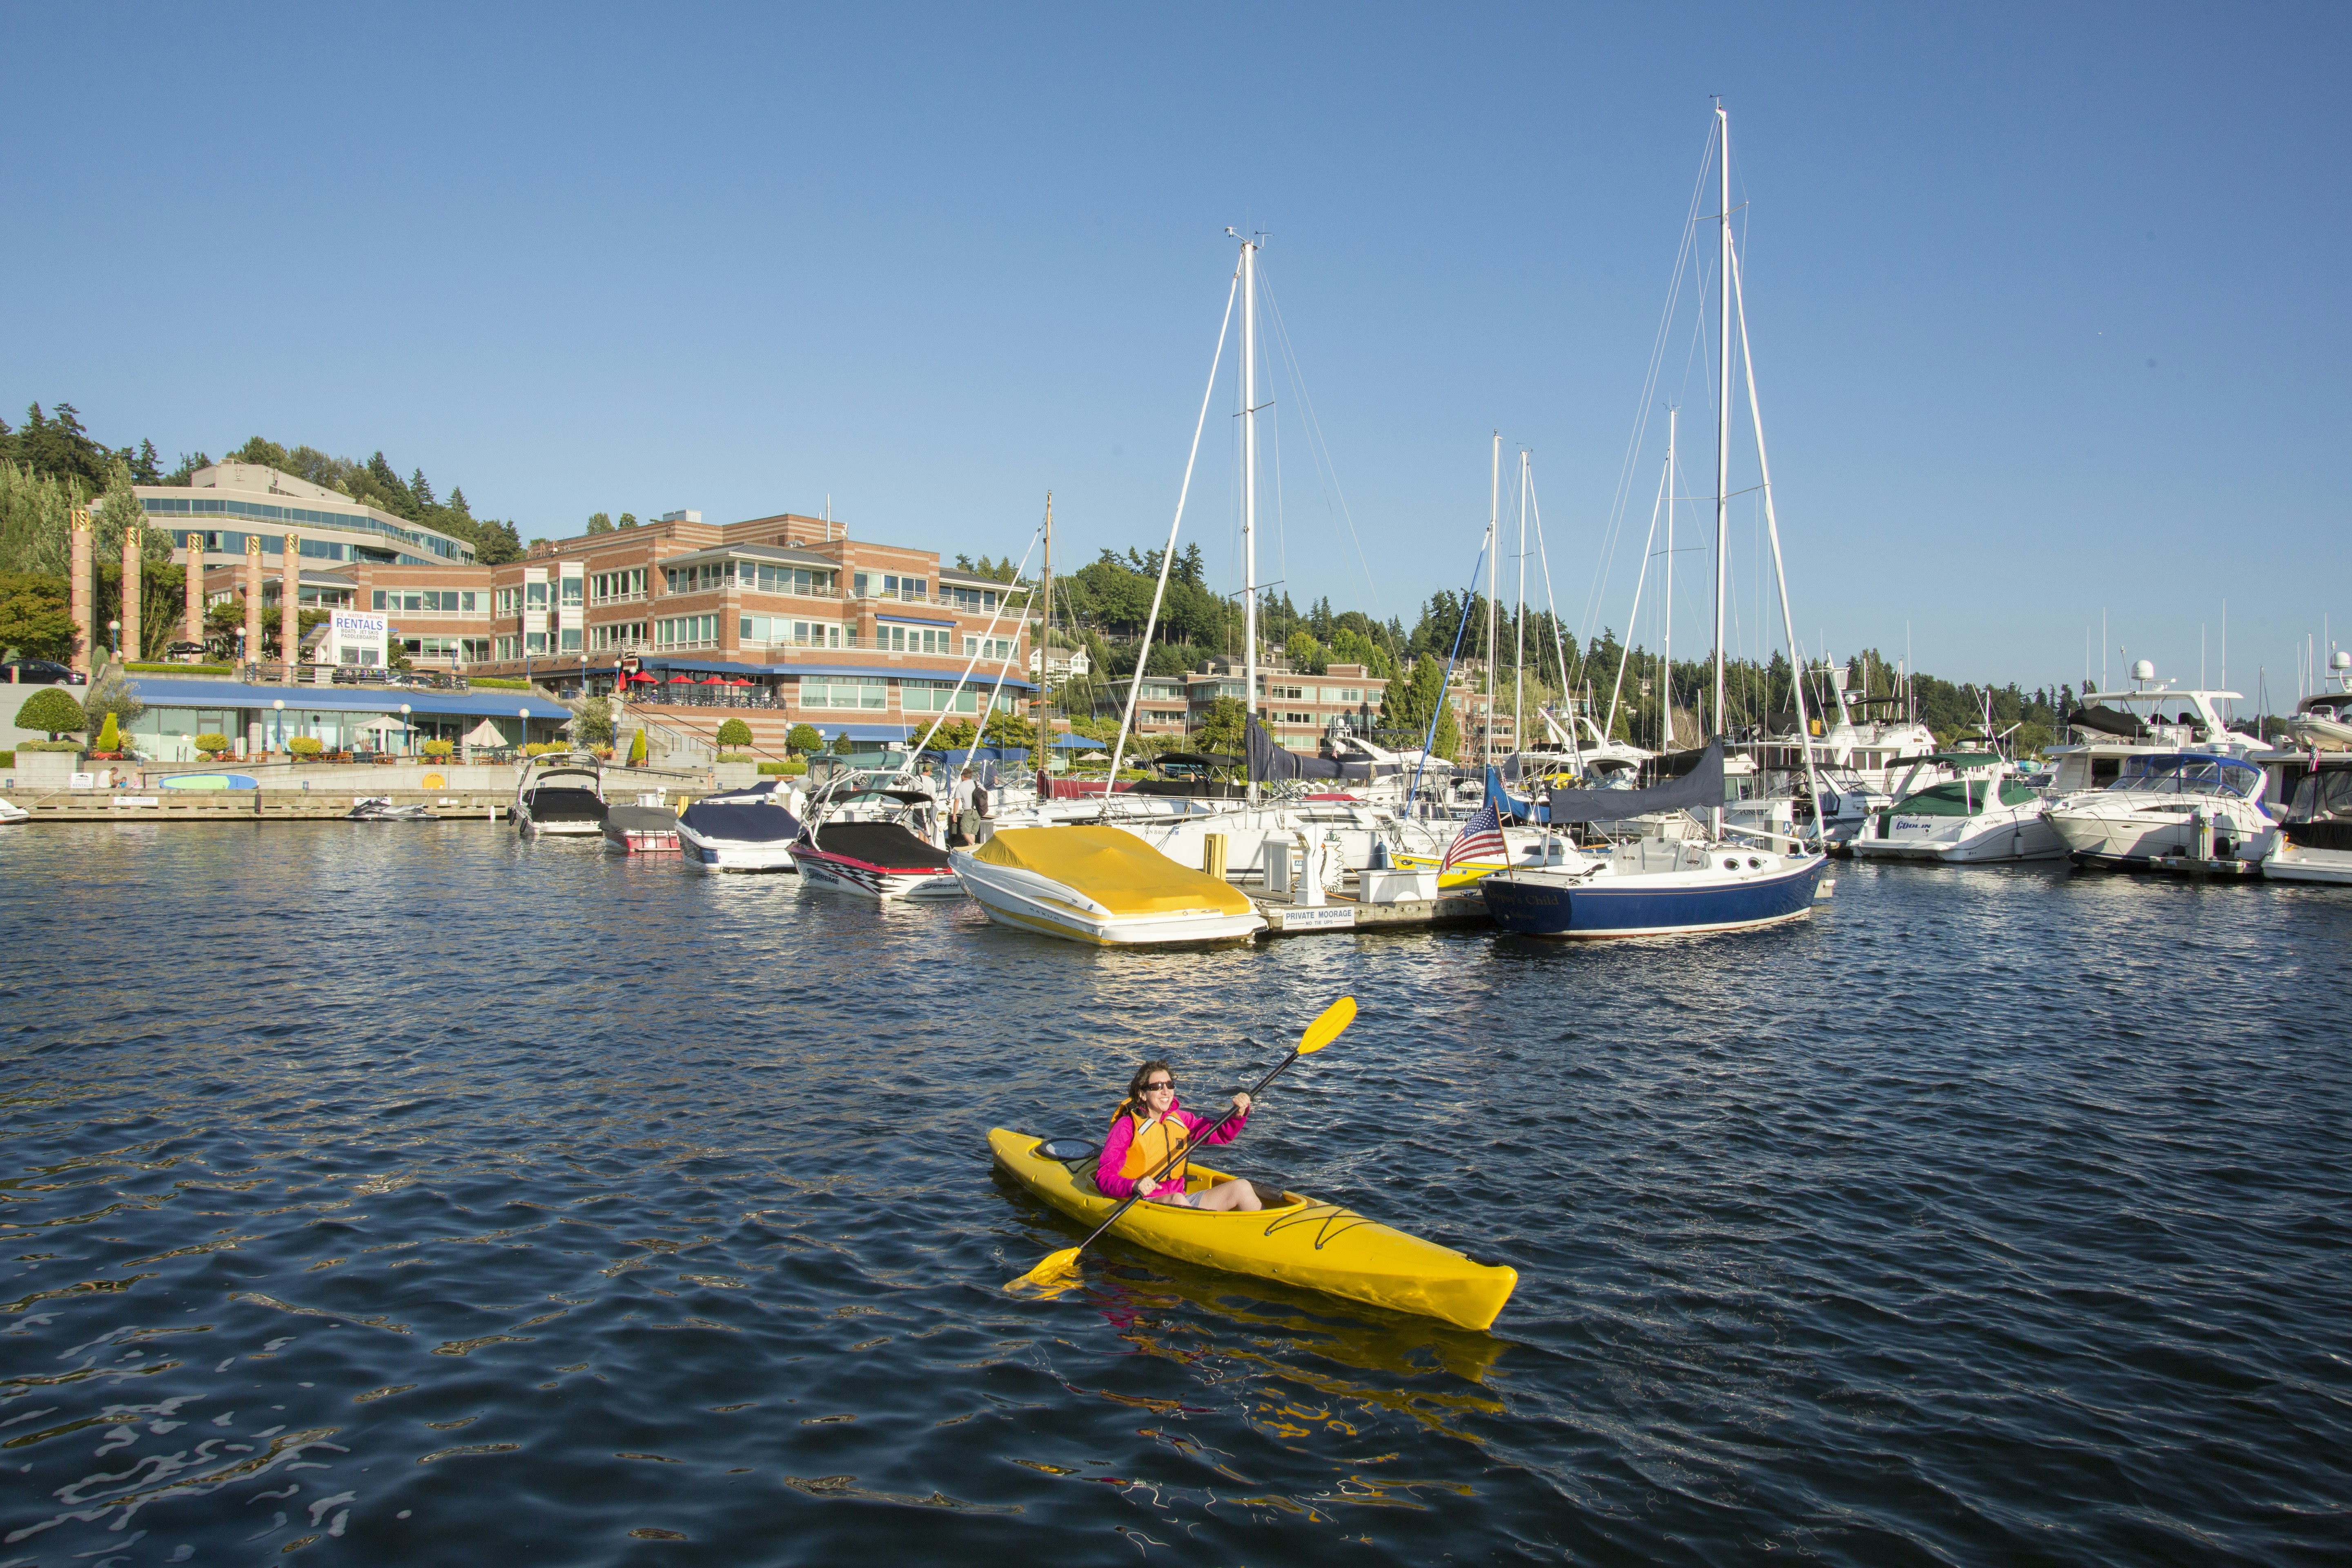 A woman in a hot pink long-sleeved top and a yellow life preserver paddles a yellow kayak with a yellow and black paddle in deep blue waters in a Kirkland, Washington marina full of sailboats, house boats, and a large brick building on a hill